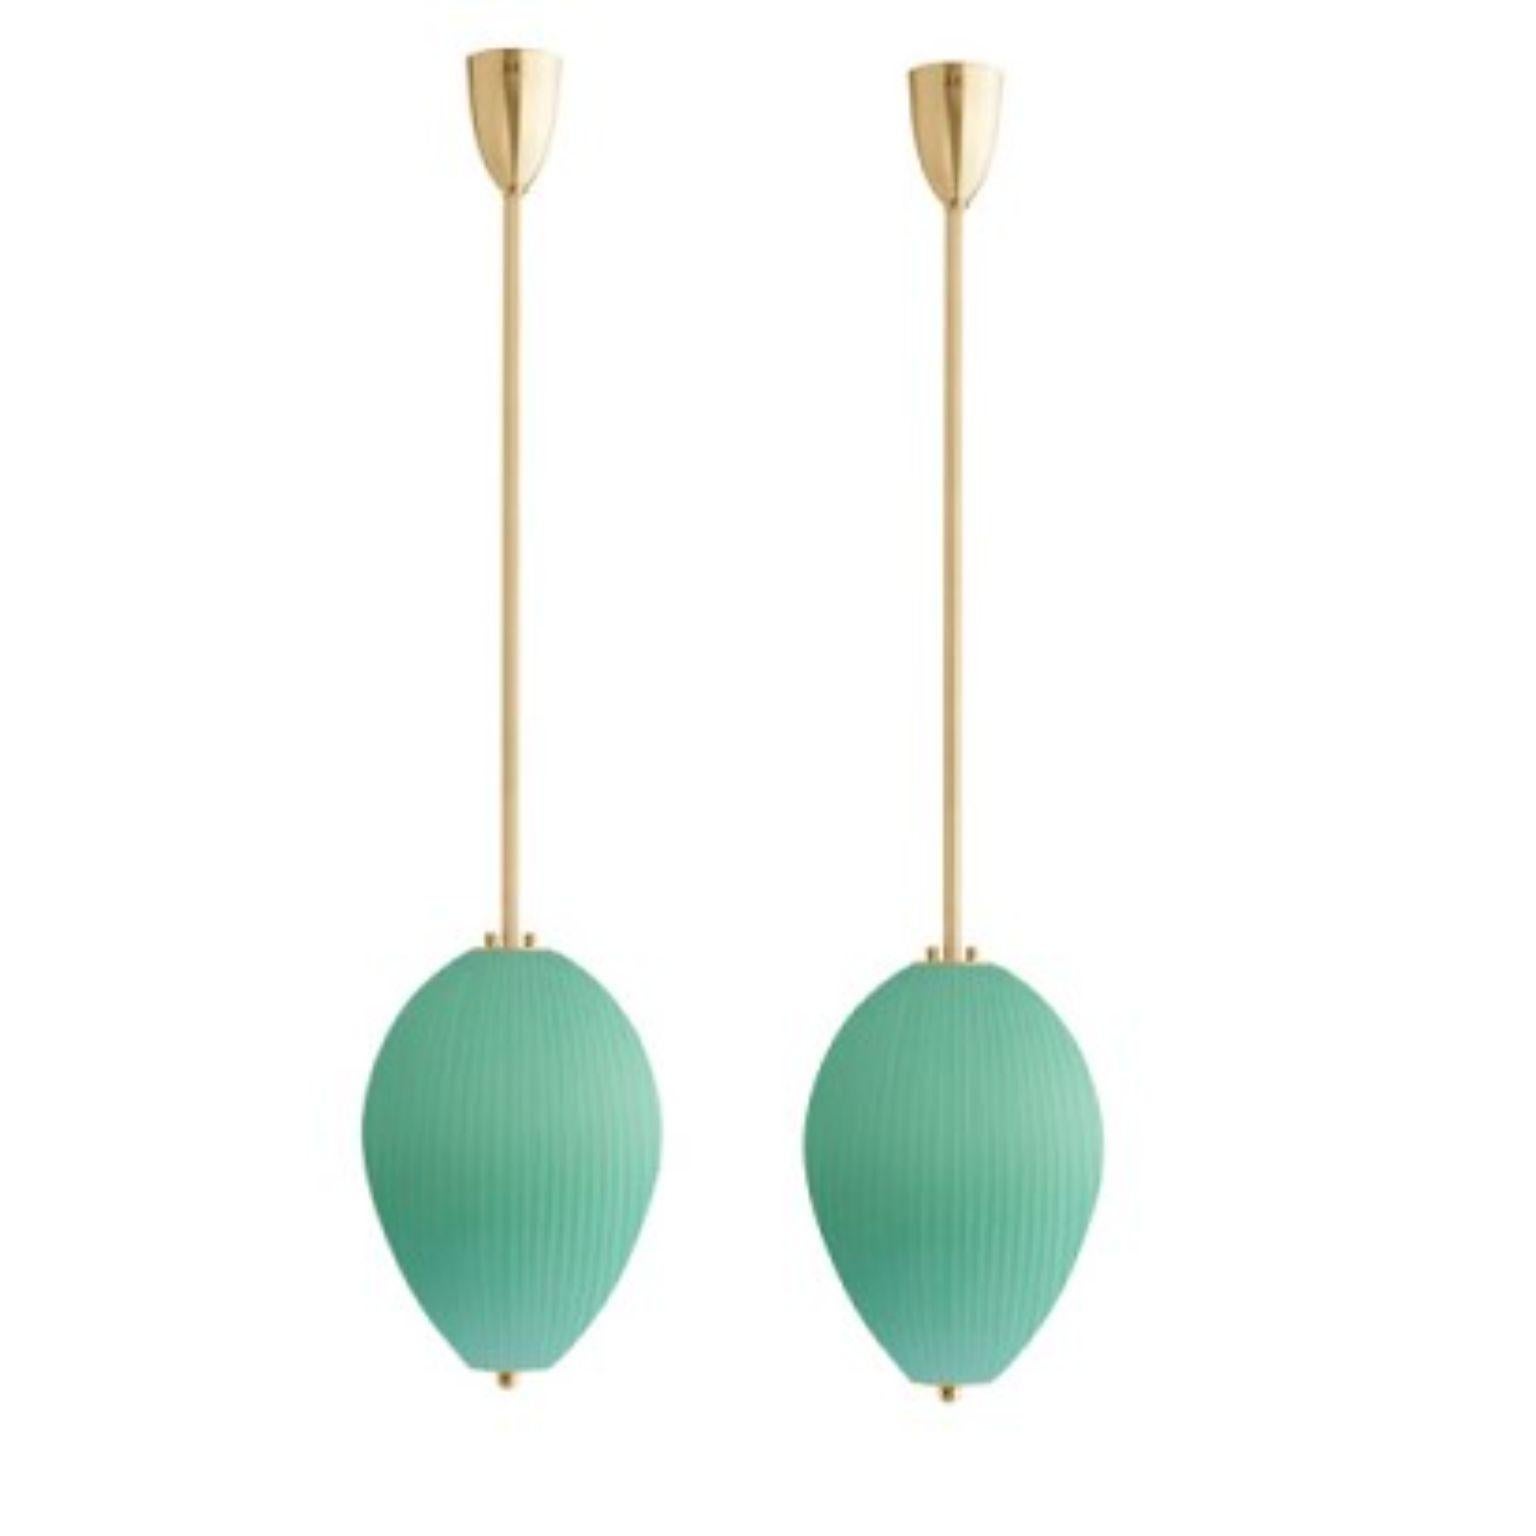 Pendant China 10 by Magic Circus Editions.
Dimensions: H 90 x W 25.2 x D 25.2 cm, also available in H 110, 130, 150, 175, 190 cm.
Materials: brass, mouth blown glass sculpted with a diamond saw.
Colour: jade green

Available finishes: brass,